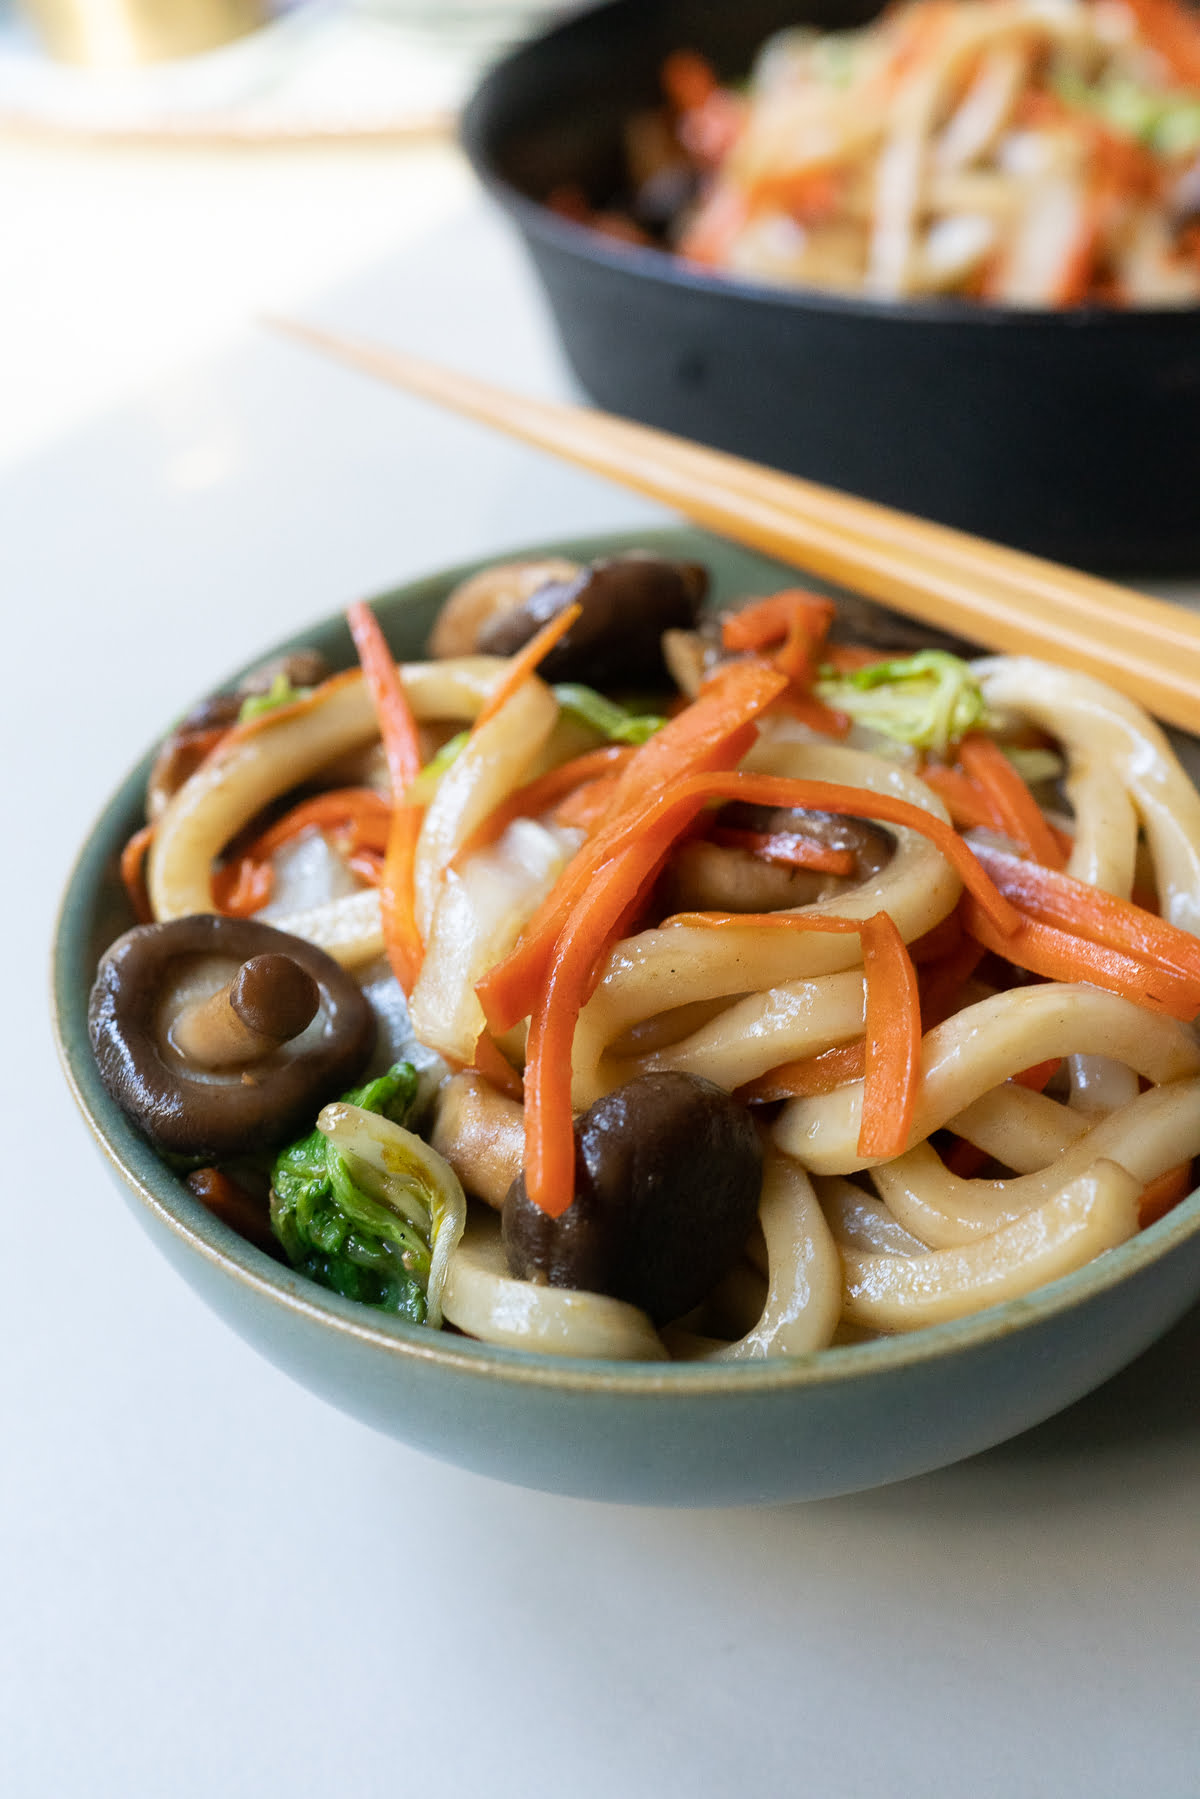 A bowl of yaki udon, ready to eat.